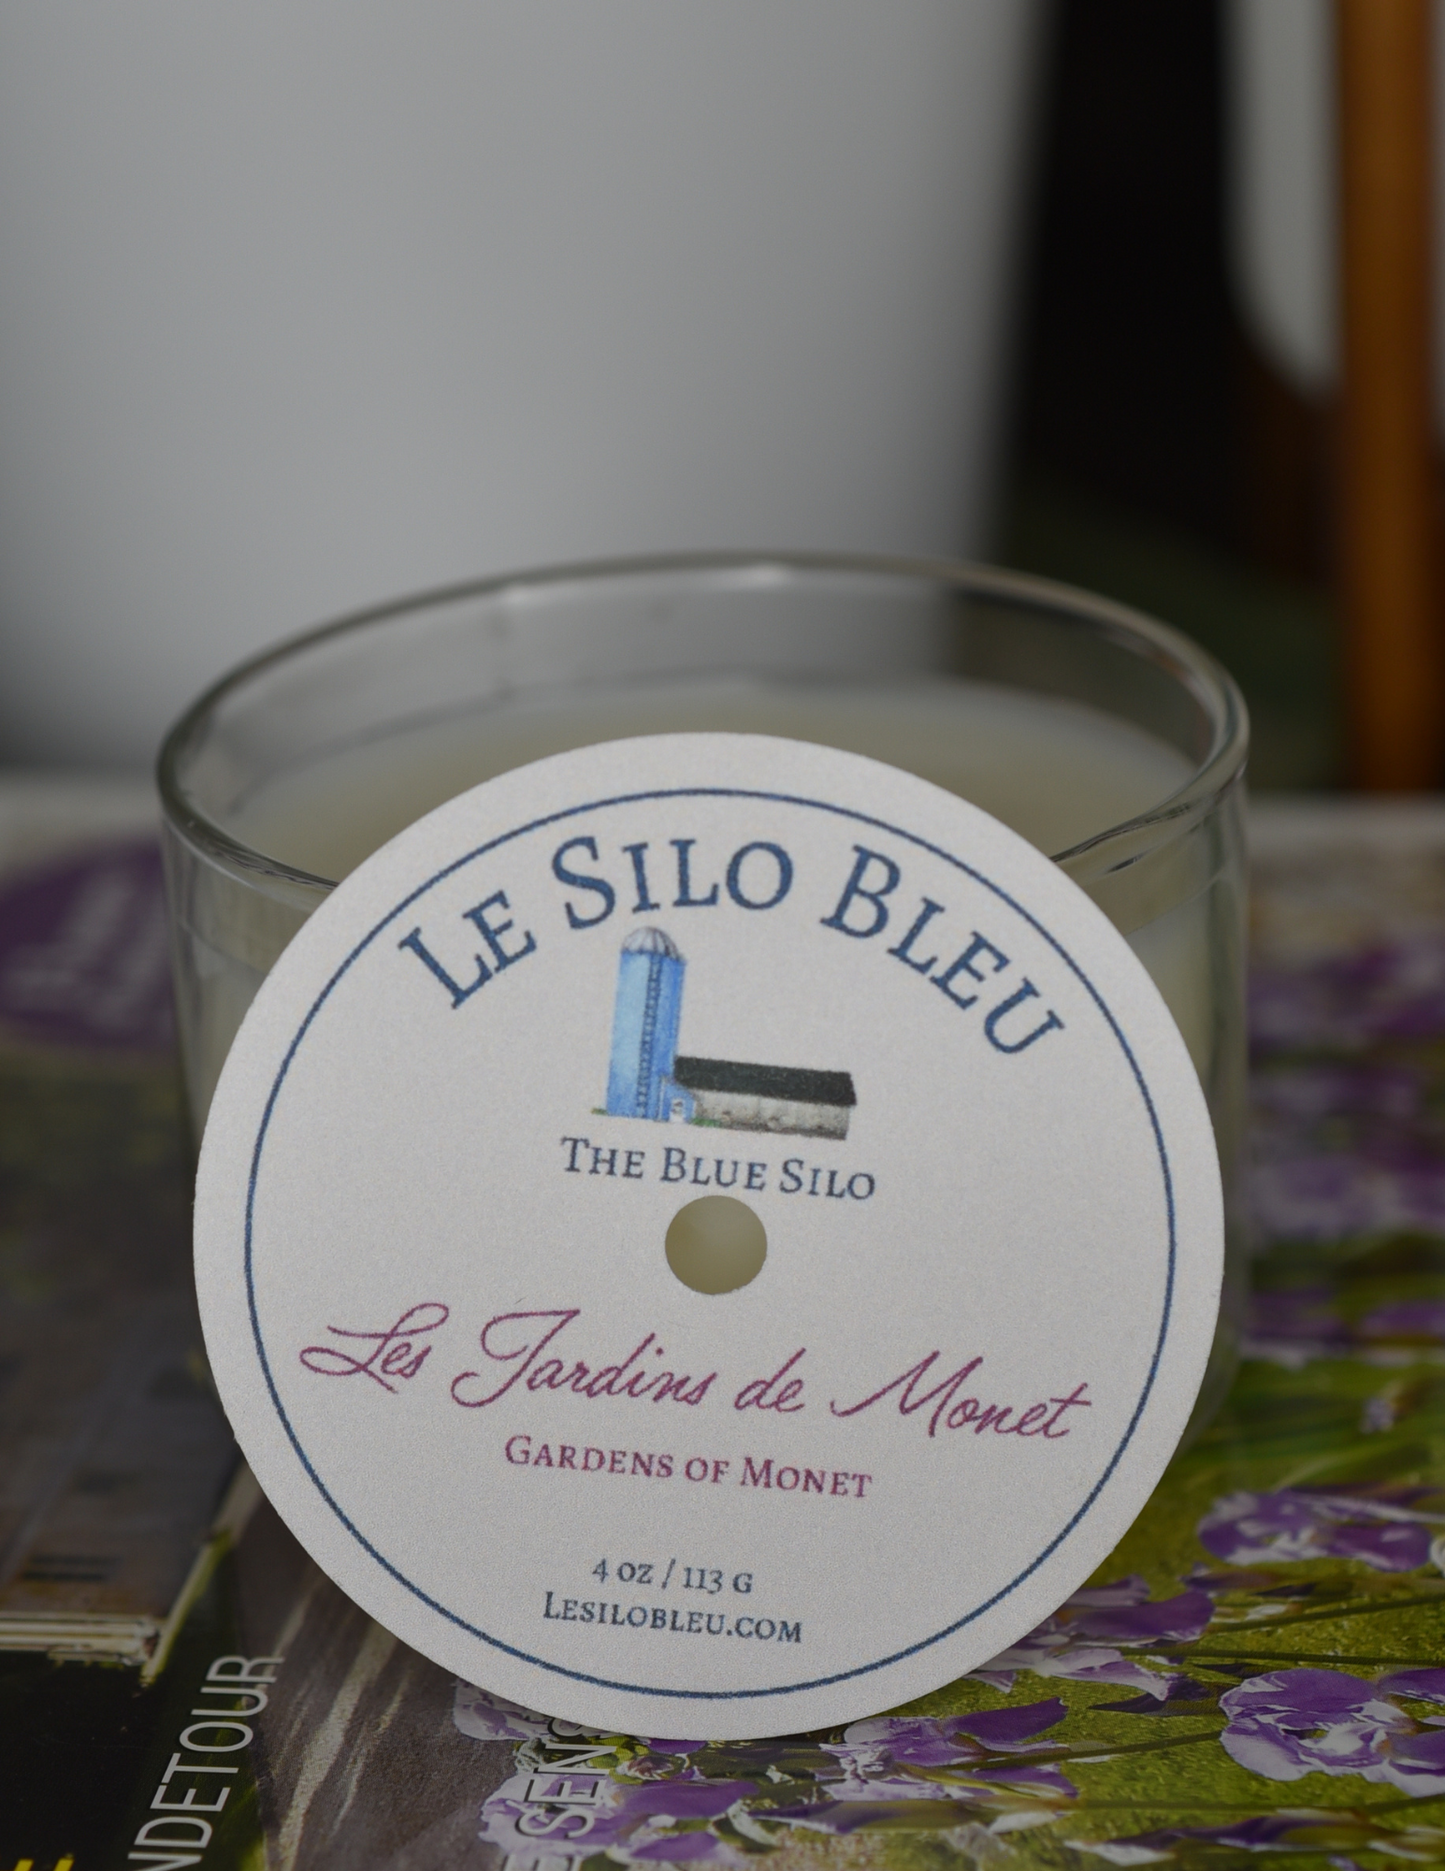 Les Jardins de Monet, a floral  scented candle is sitting on top of a French magazine with a plant in a white pot in the background.